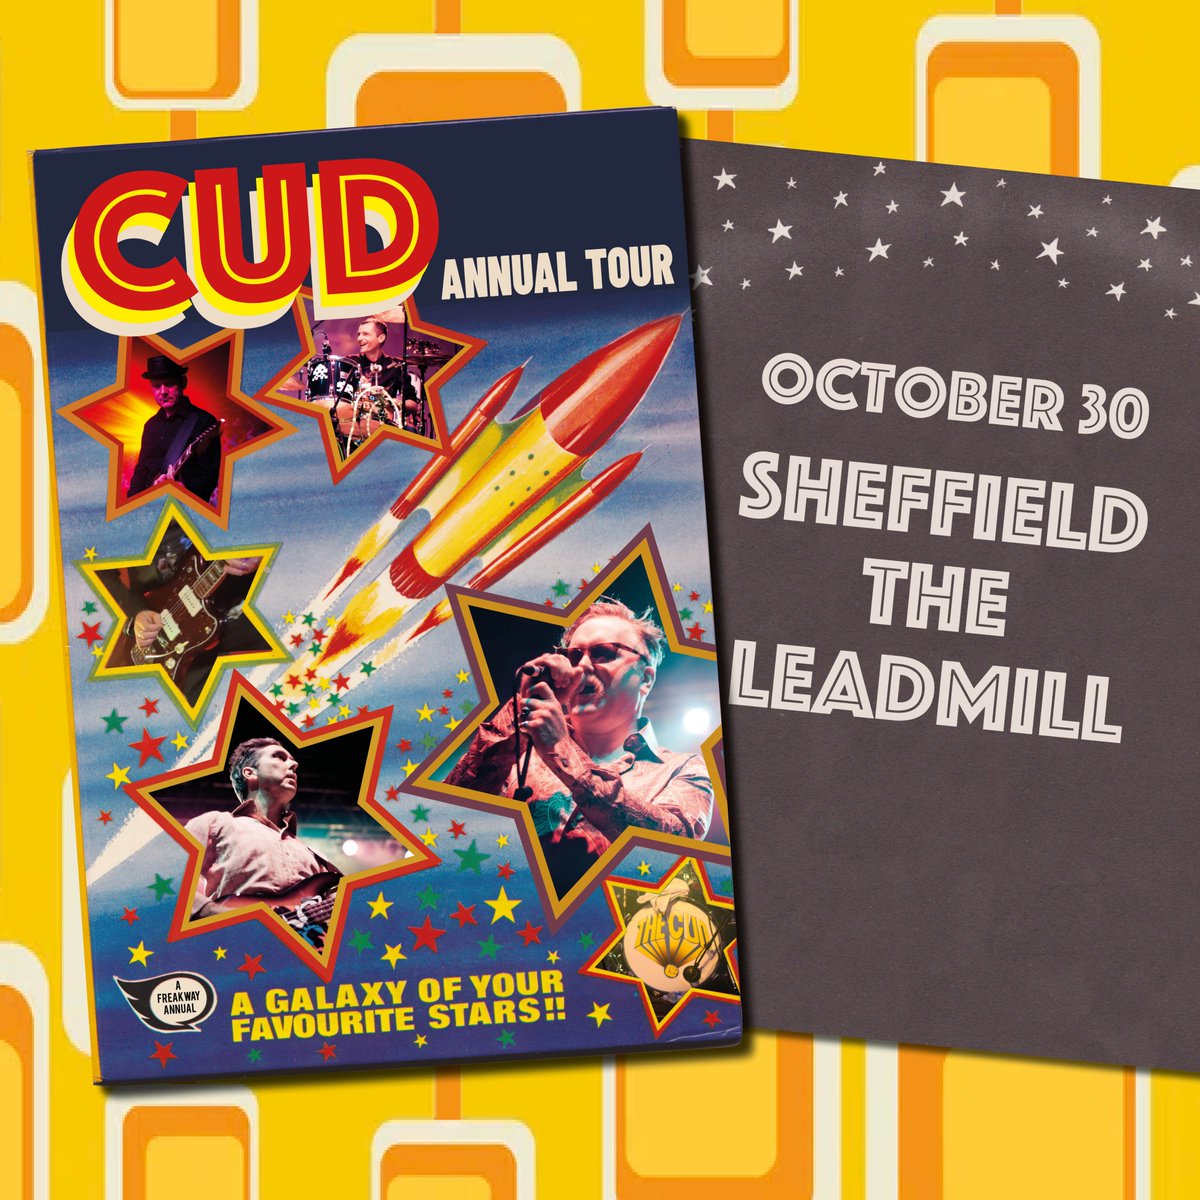 We've had plenty of classic nights with Leeds favourites @CUDband over the decades, including two sell-out shows in as many years, so we have no doubt that this will be another to add to the list 🪩 Still knocking it out of the park live, tickets here > leadmill.co.uk/event/cud/